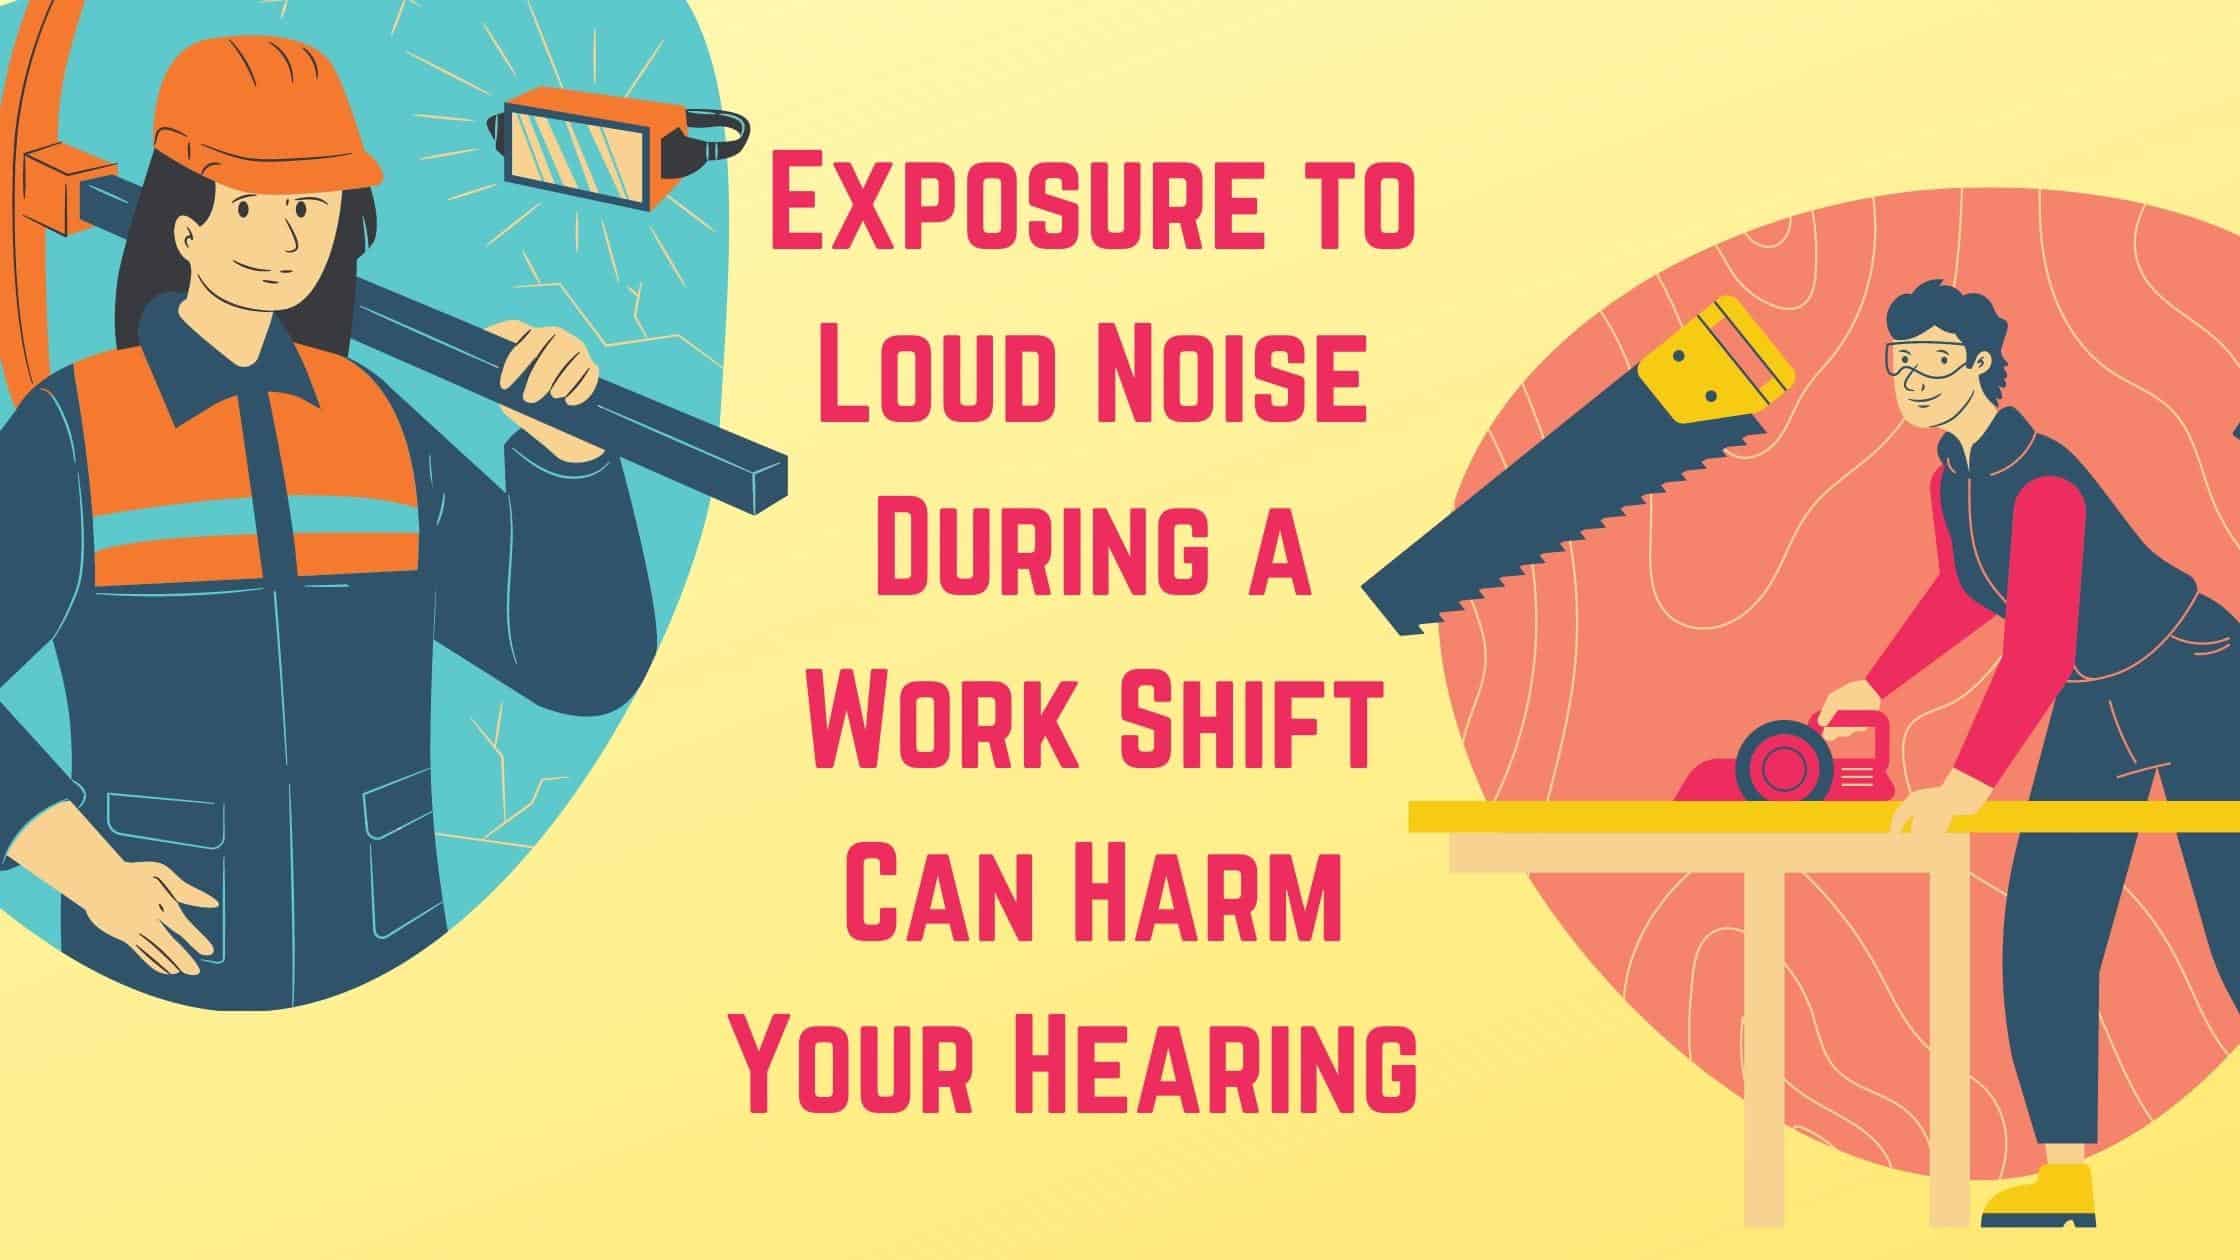 Exposure to Loud Noise During a Work Shift Can Harm Your Hearing My